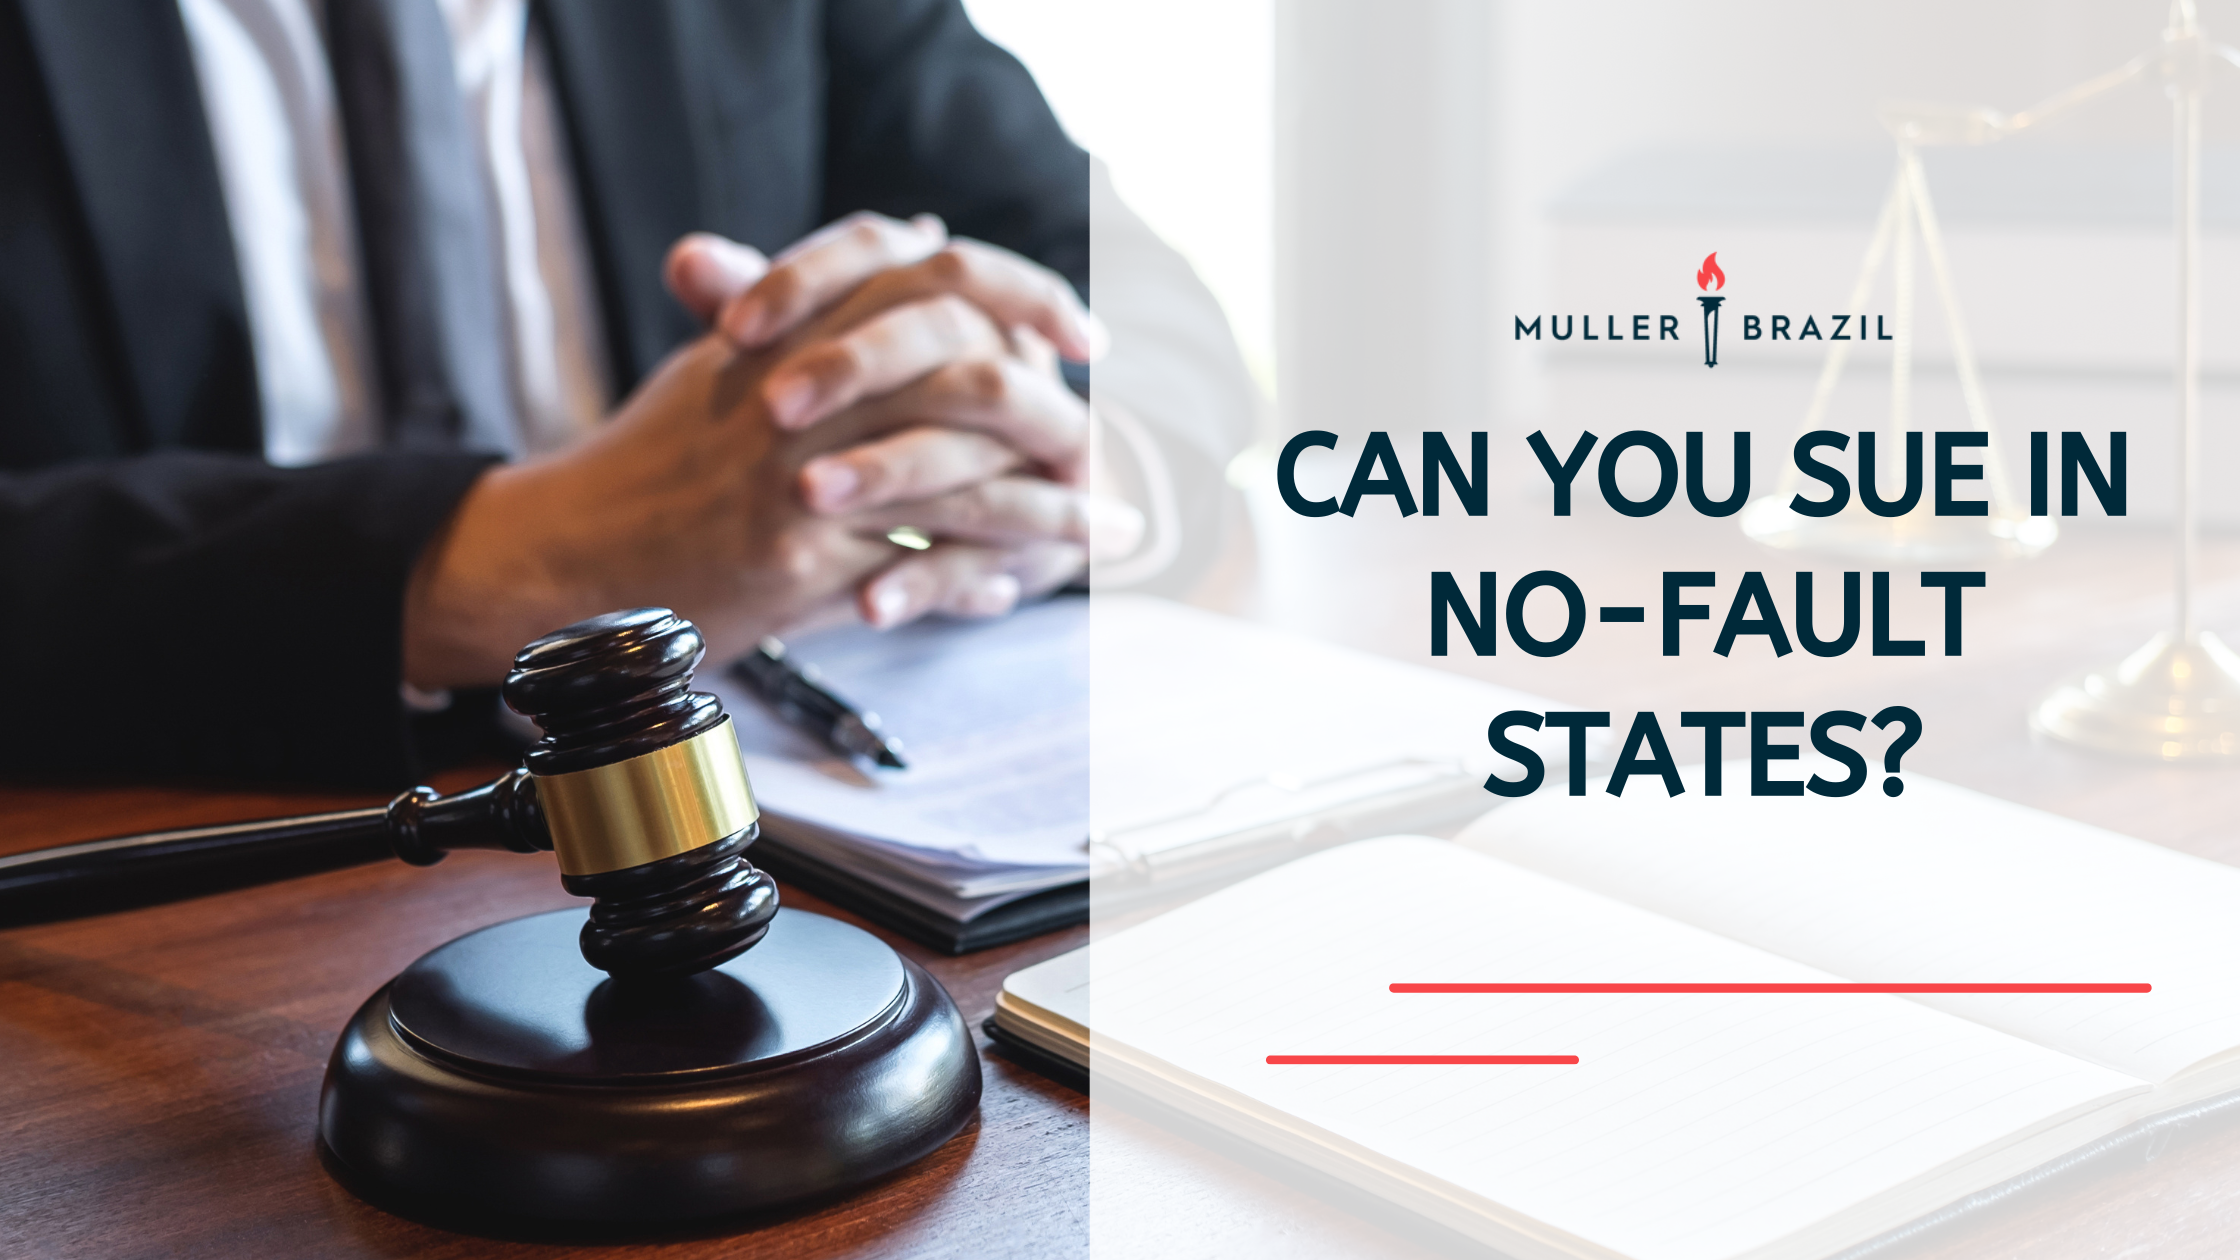 Can You Sue in No-Fault States?